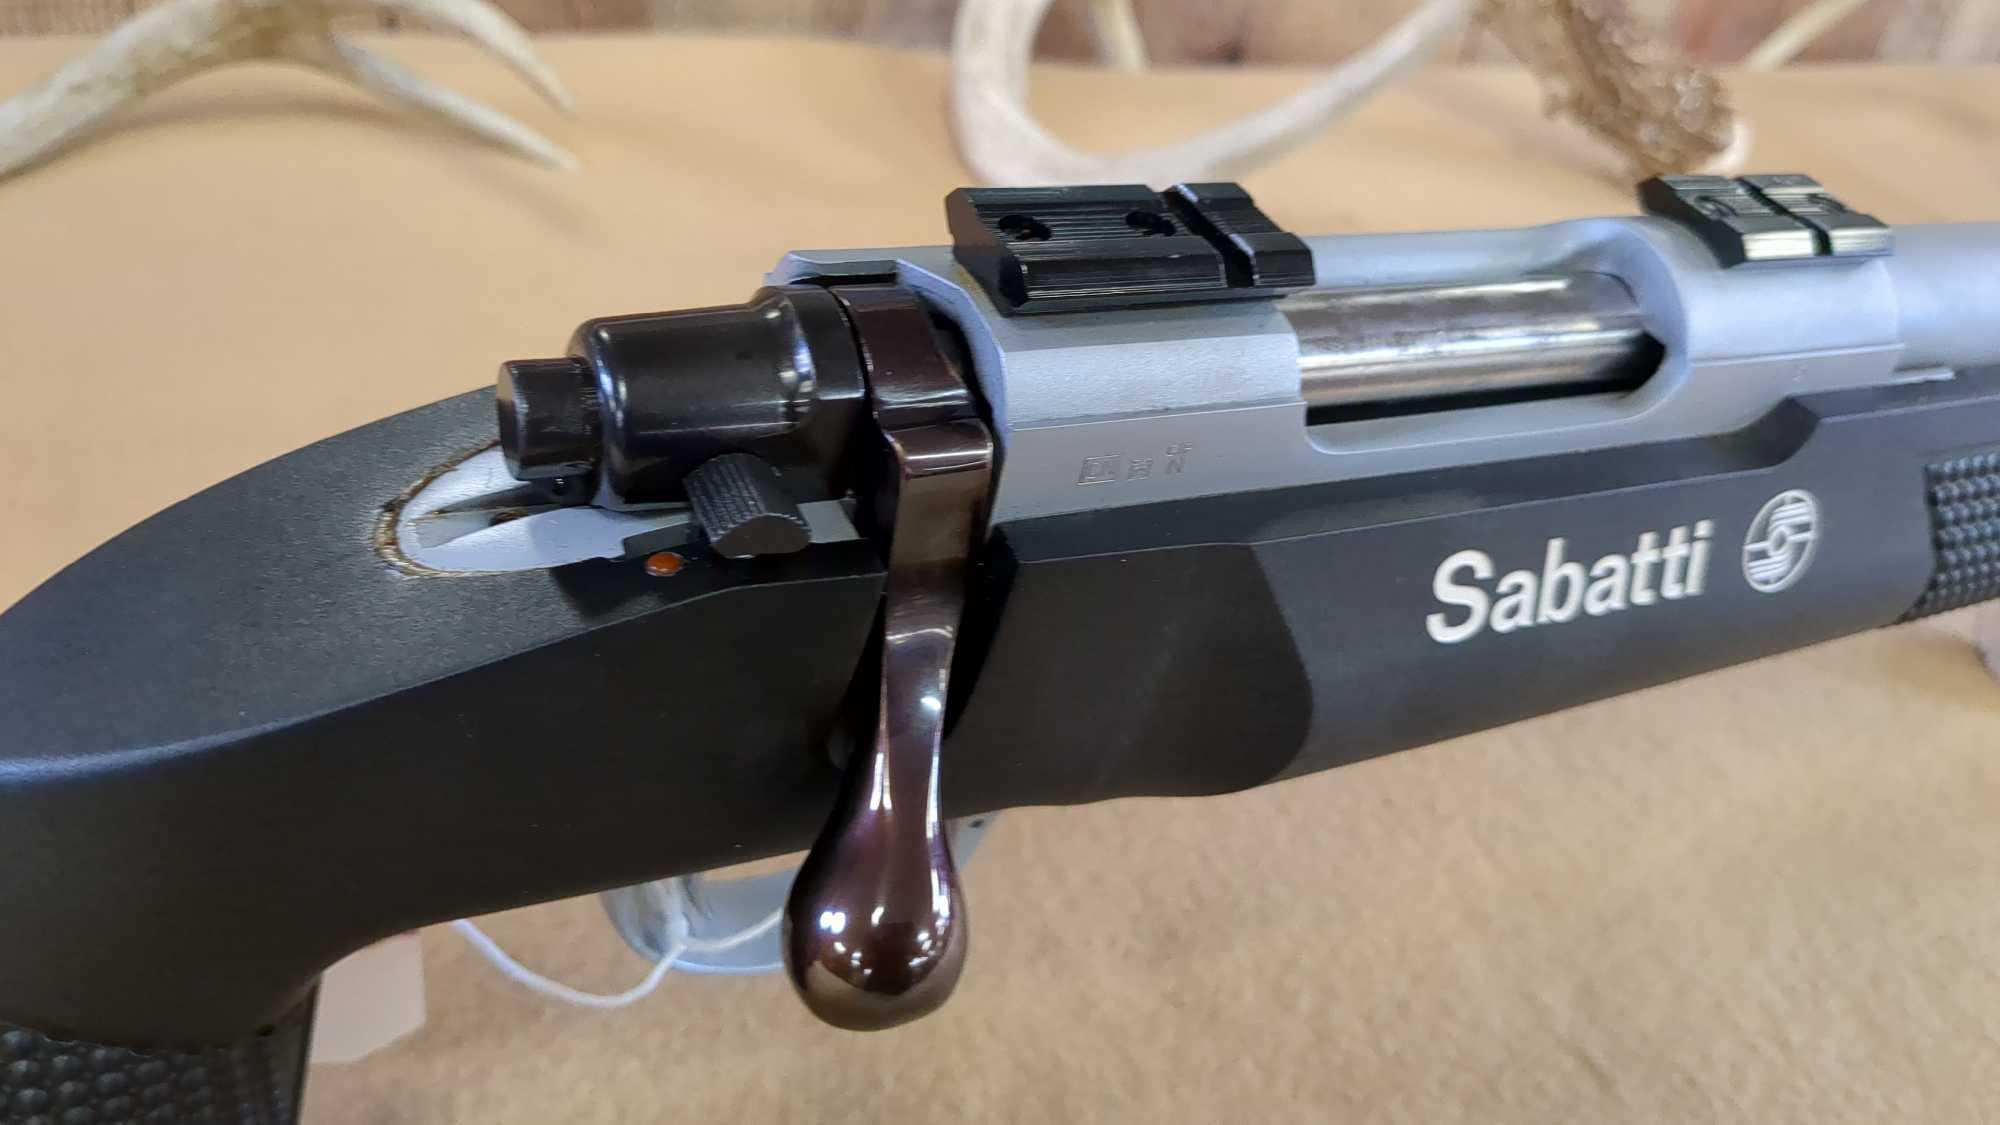 SABATII MODEL ROVER TACTICAL INOX SYNTHETIC .223 REM BOLT ACTION RIFLE